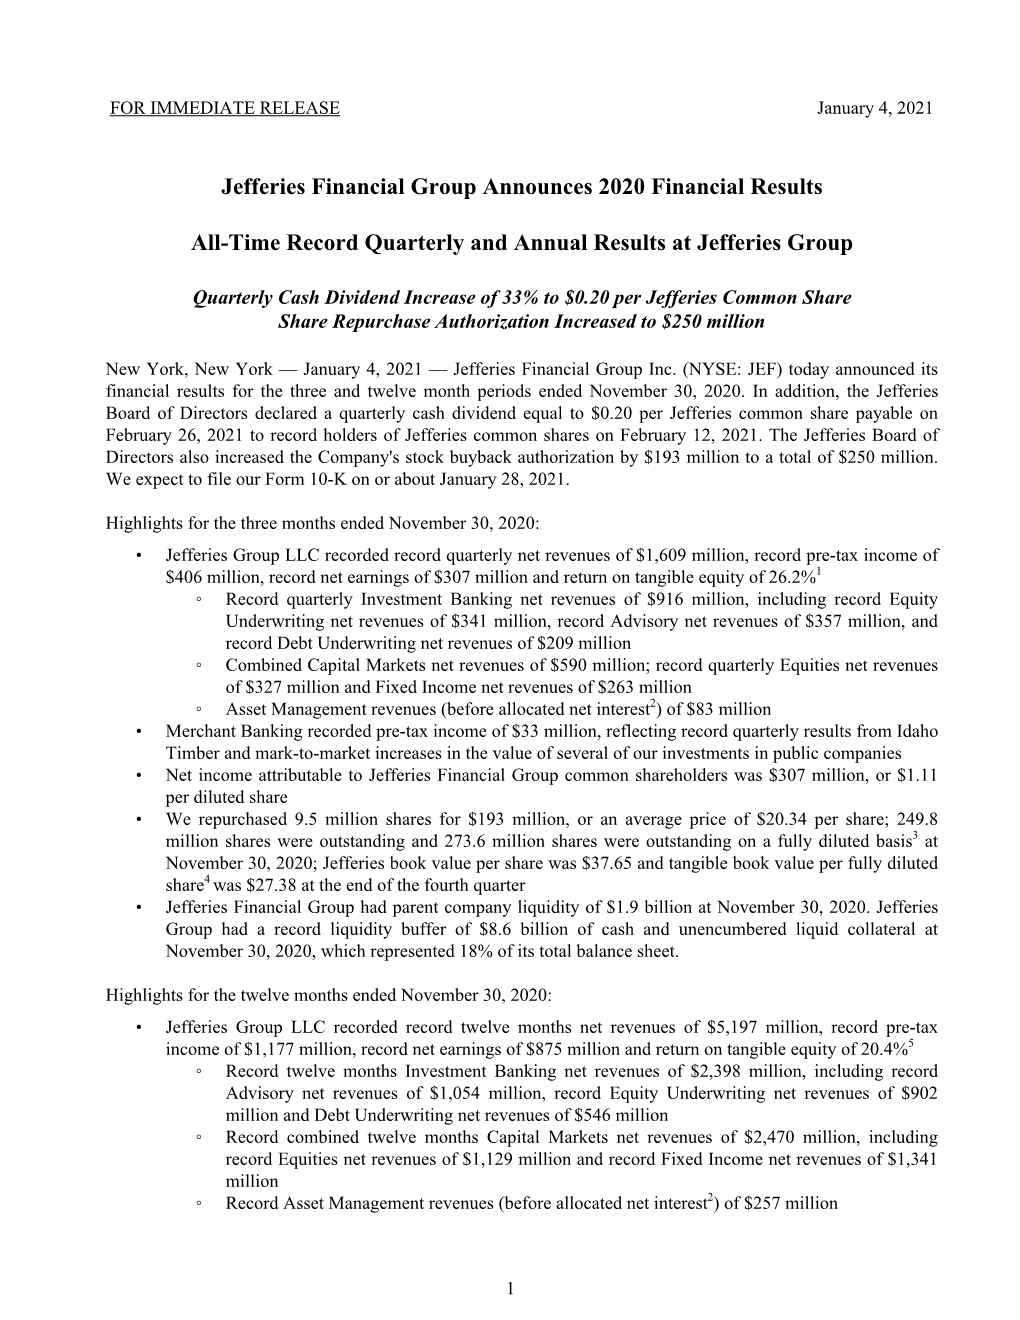 Jefferies Financial Group Announces 2020 Financial Results